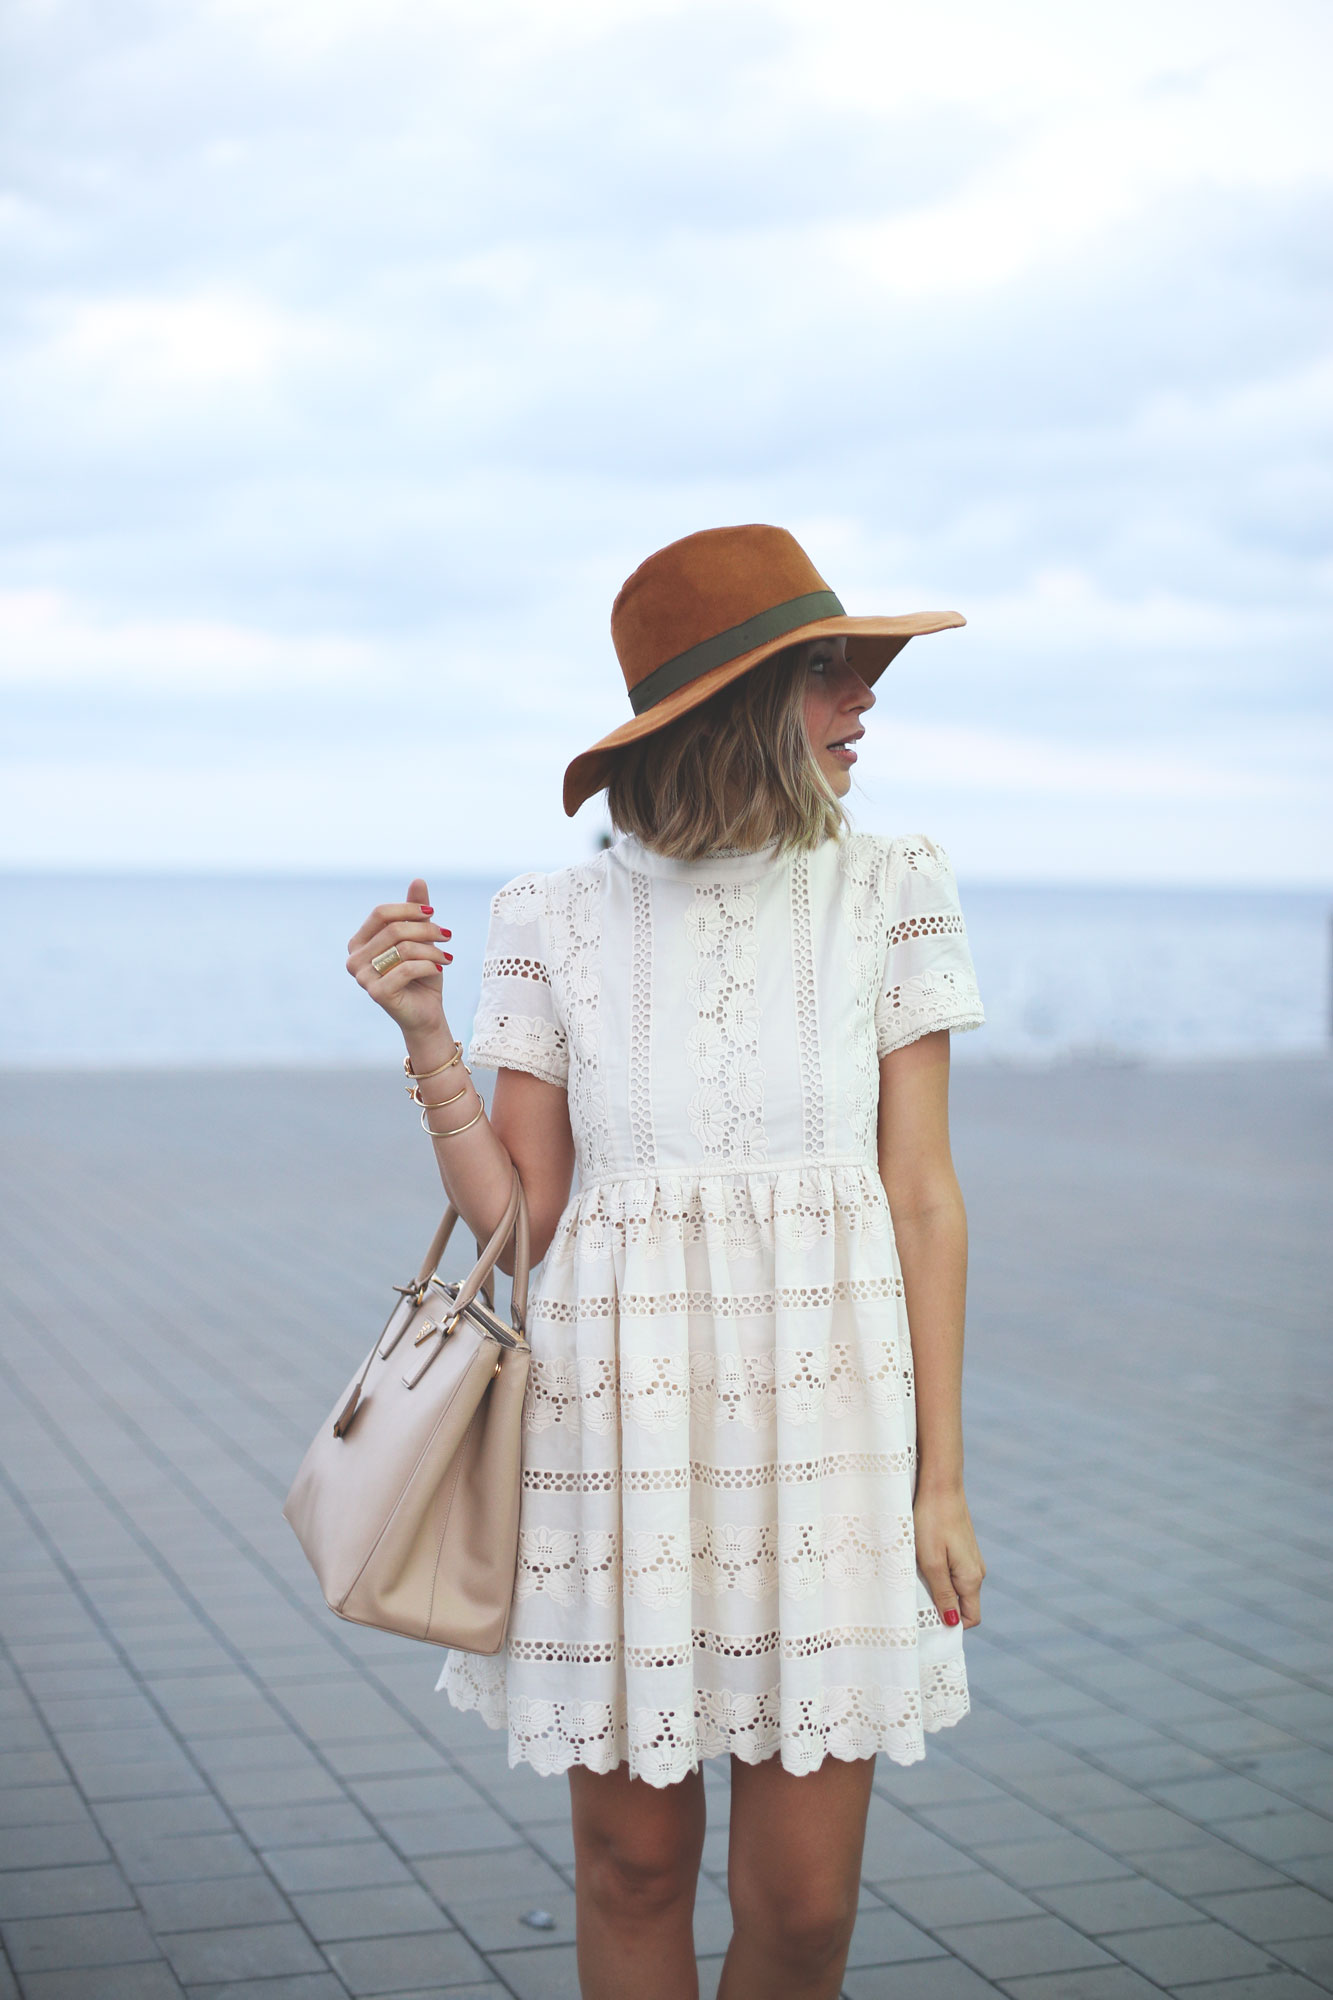 tan hat and white lace dress